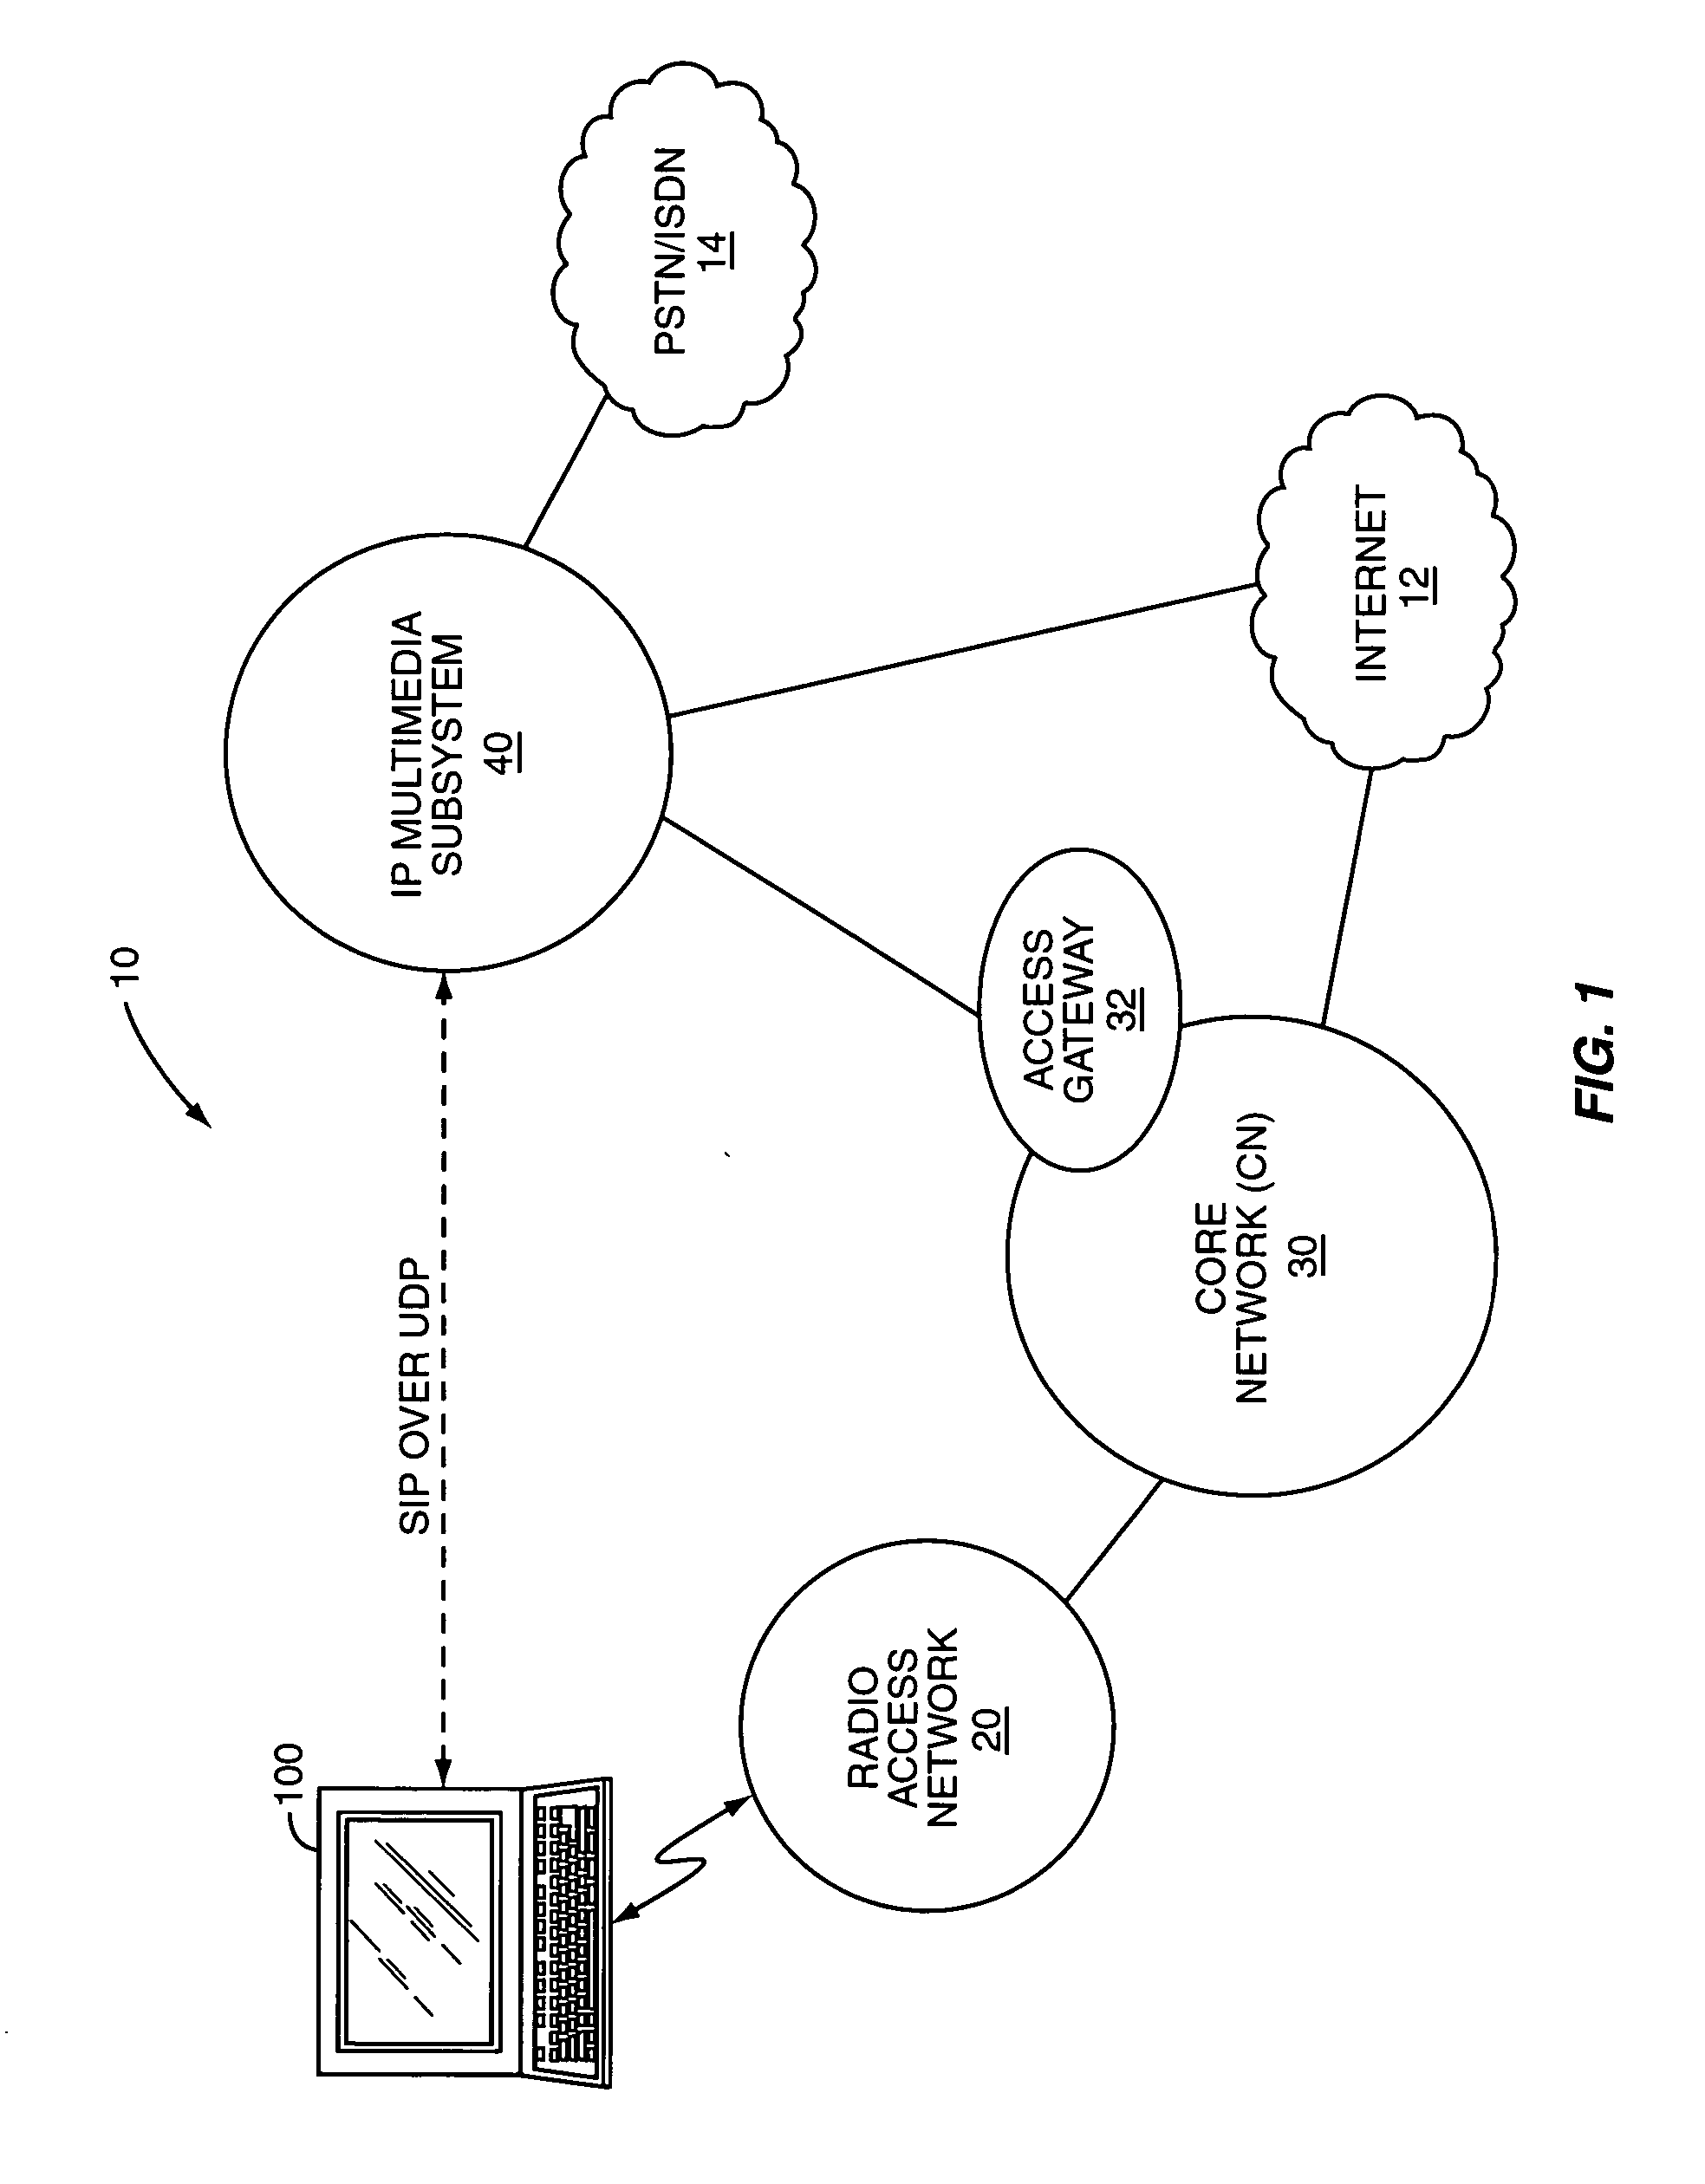 Media client architecture for networked communication devices